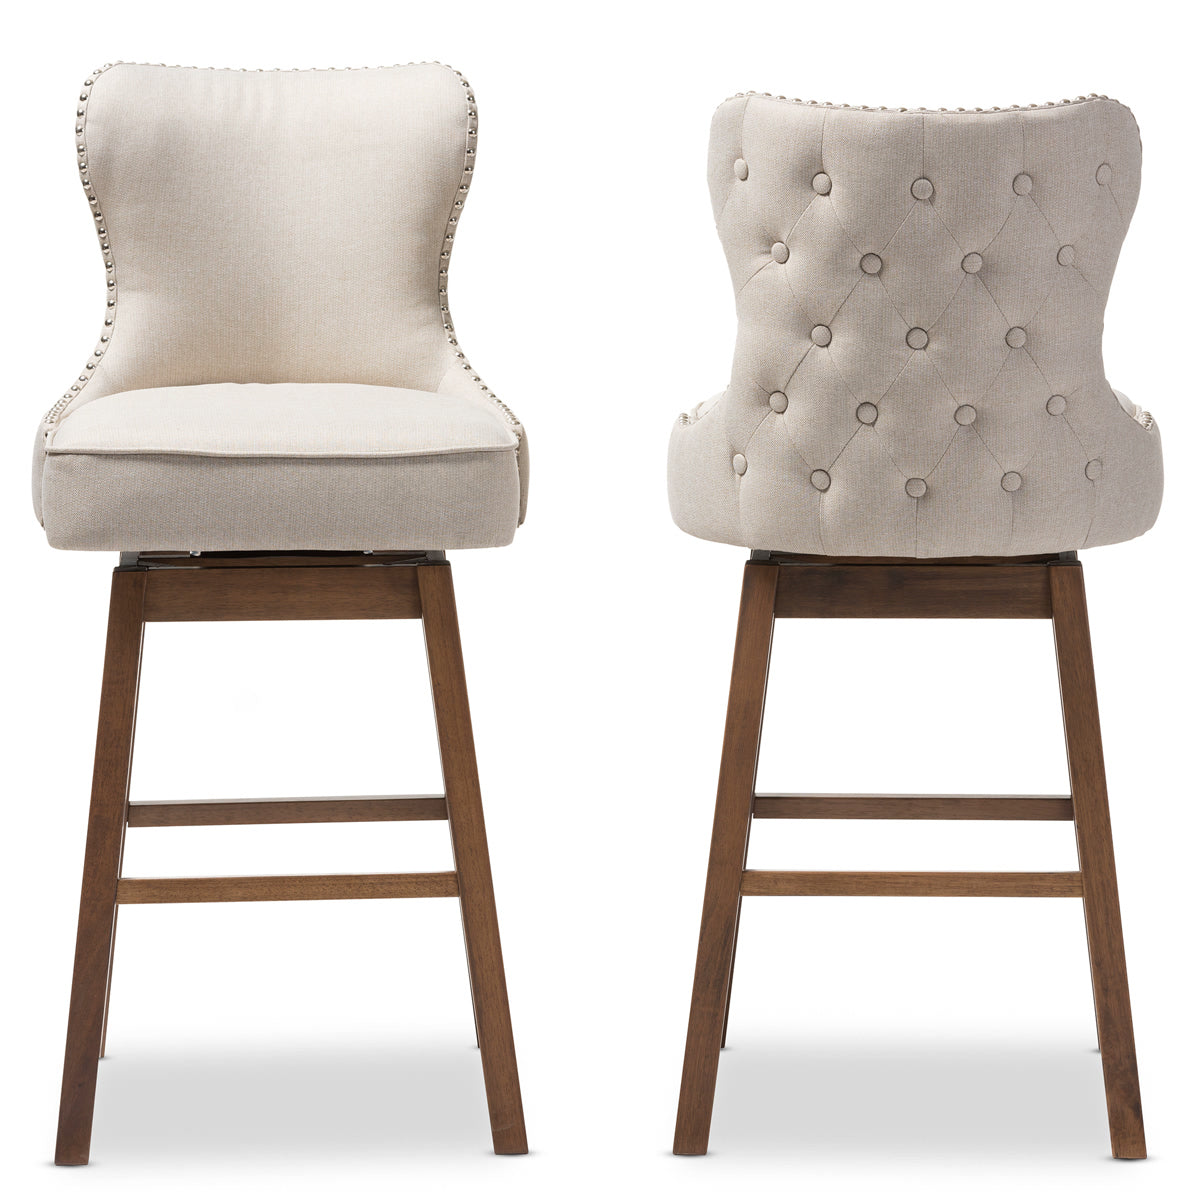 Baxton Studio Gradisca Modern and Contemporary Brown Wood Finishing and Light Beige Fabric Button-Tufted Upholstered Swivel Barstool Baxton Studio-Bar Stools-Minimal And Modern - 3